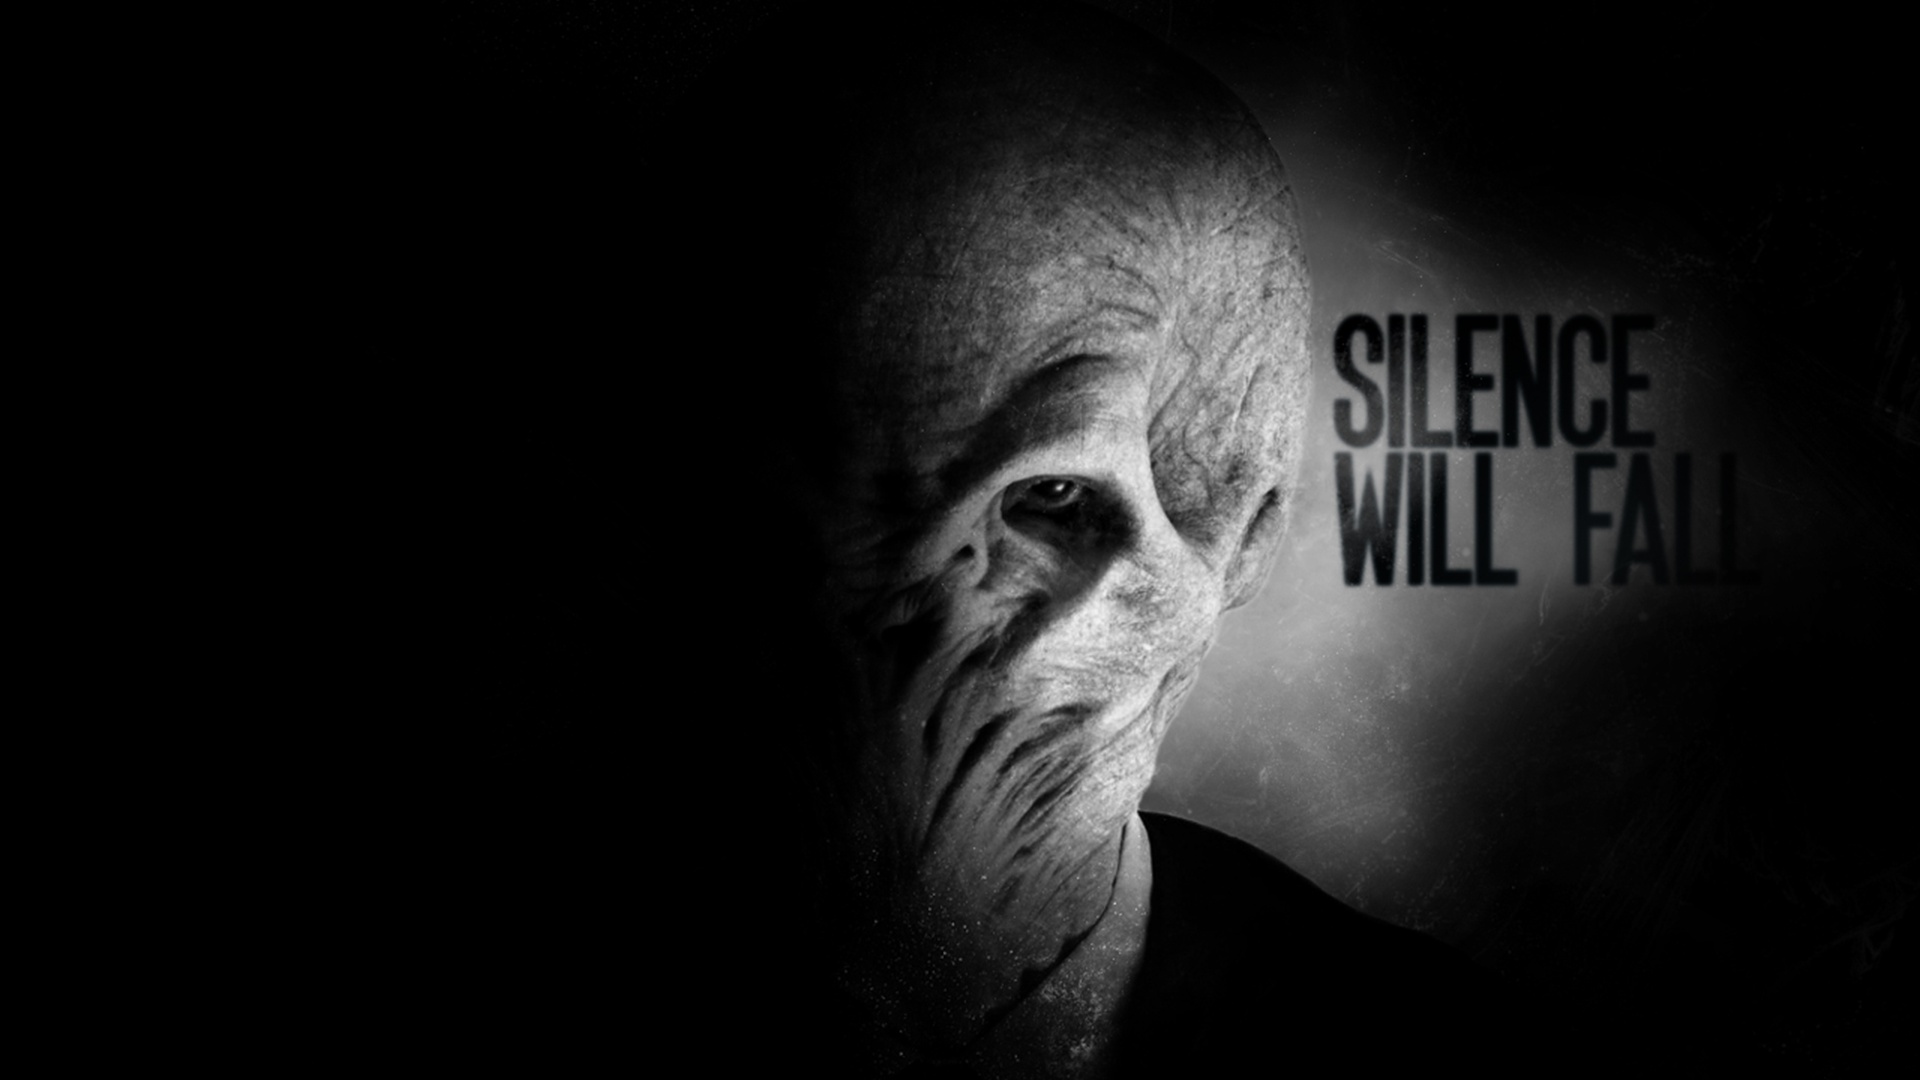 Selected Resoloution Wallpaper Dr Who Silence Will Fall